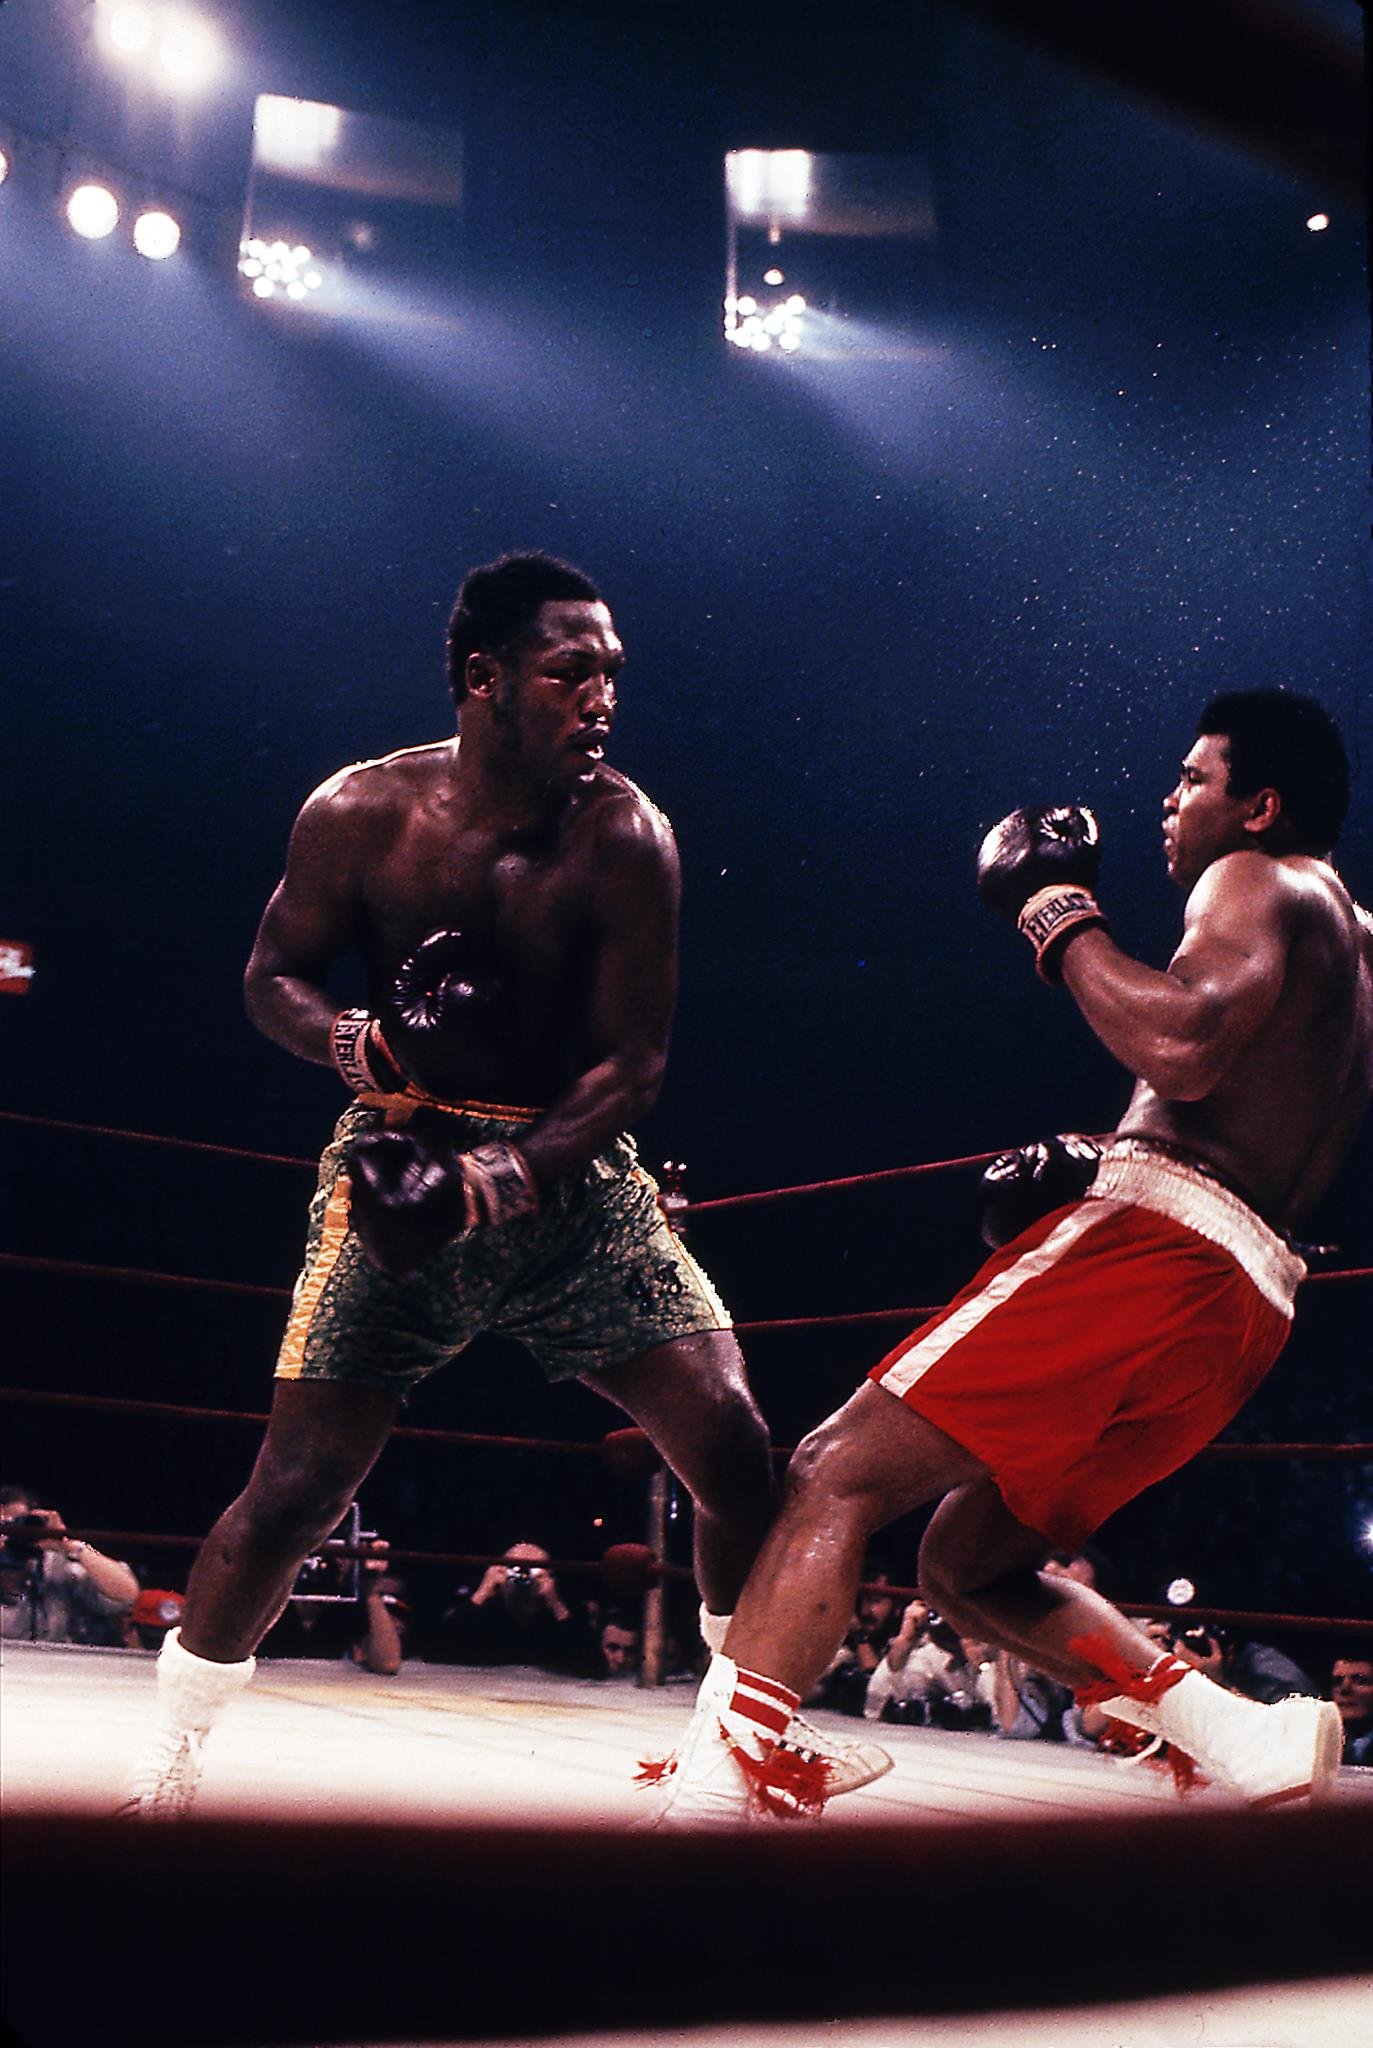 Joe Frazier defeating Muhammad Ali in 1971 at Madison Square Garden